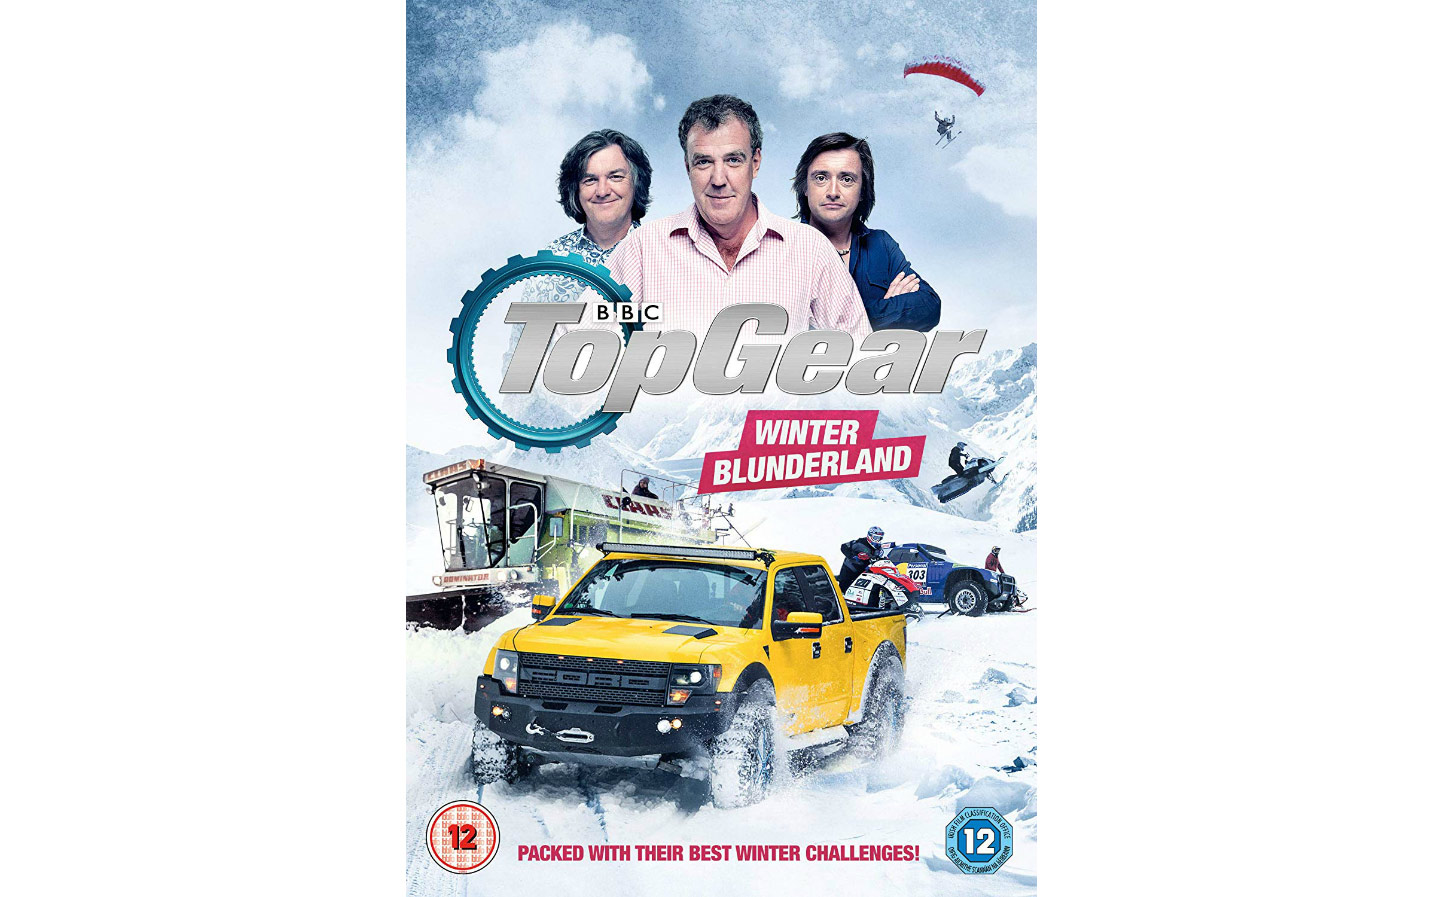 Christmas gift ideas for car fan: Top Gear Winter Blunderland DVD with Clarkson, Hammond and May